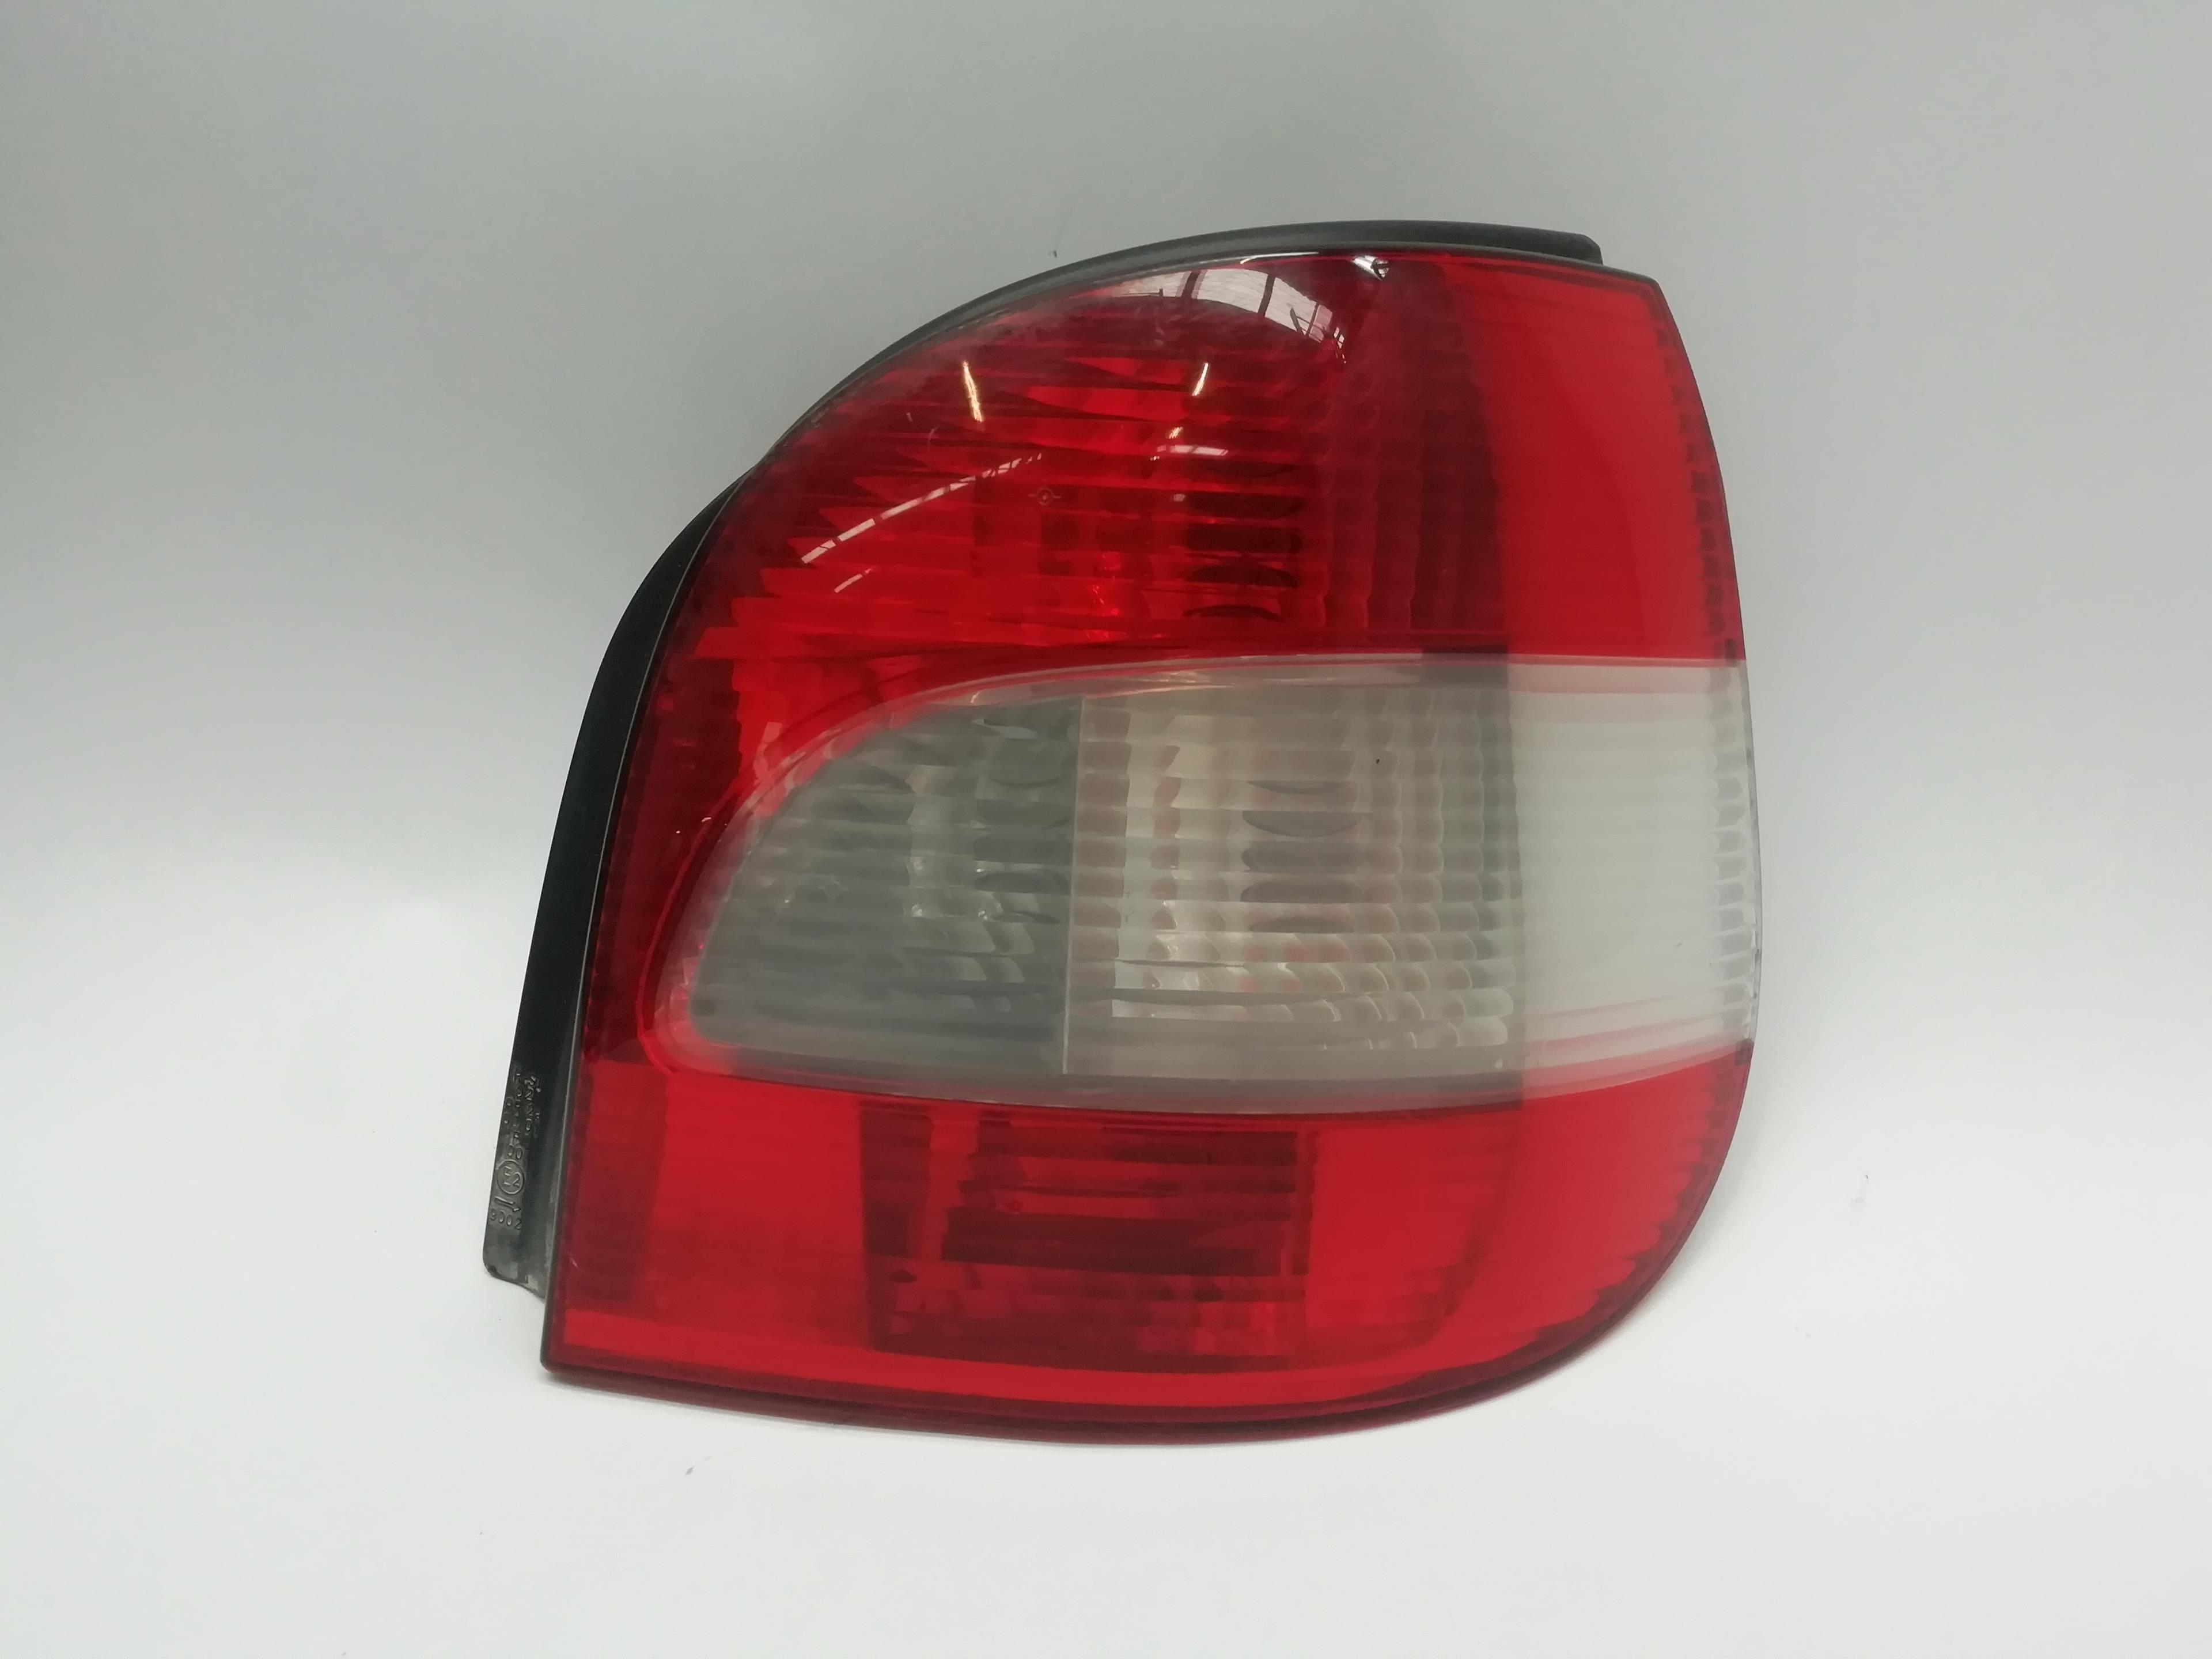 RENAULT Scenic 1 generation (1996-2003) Rear Right Taillight Lamp 7700430966 22346650